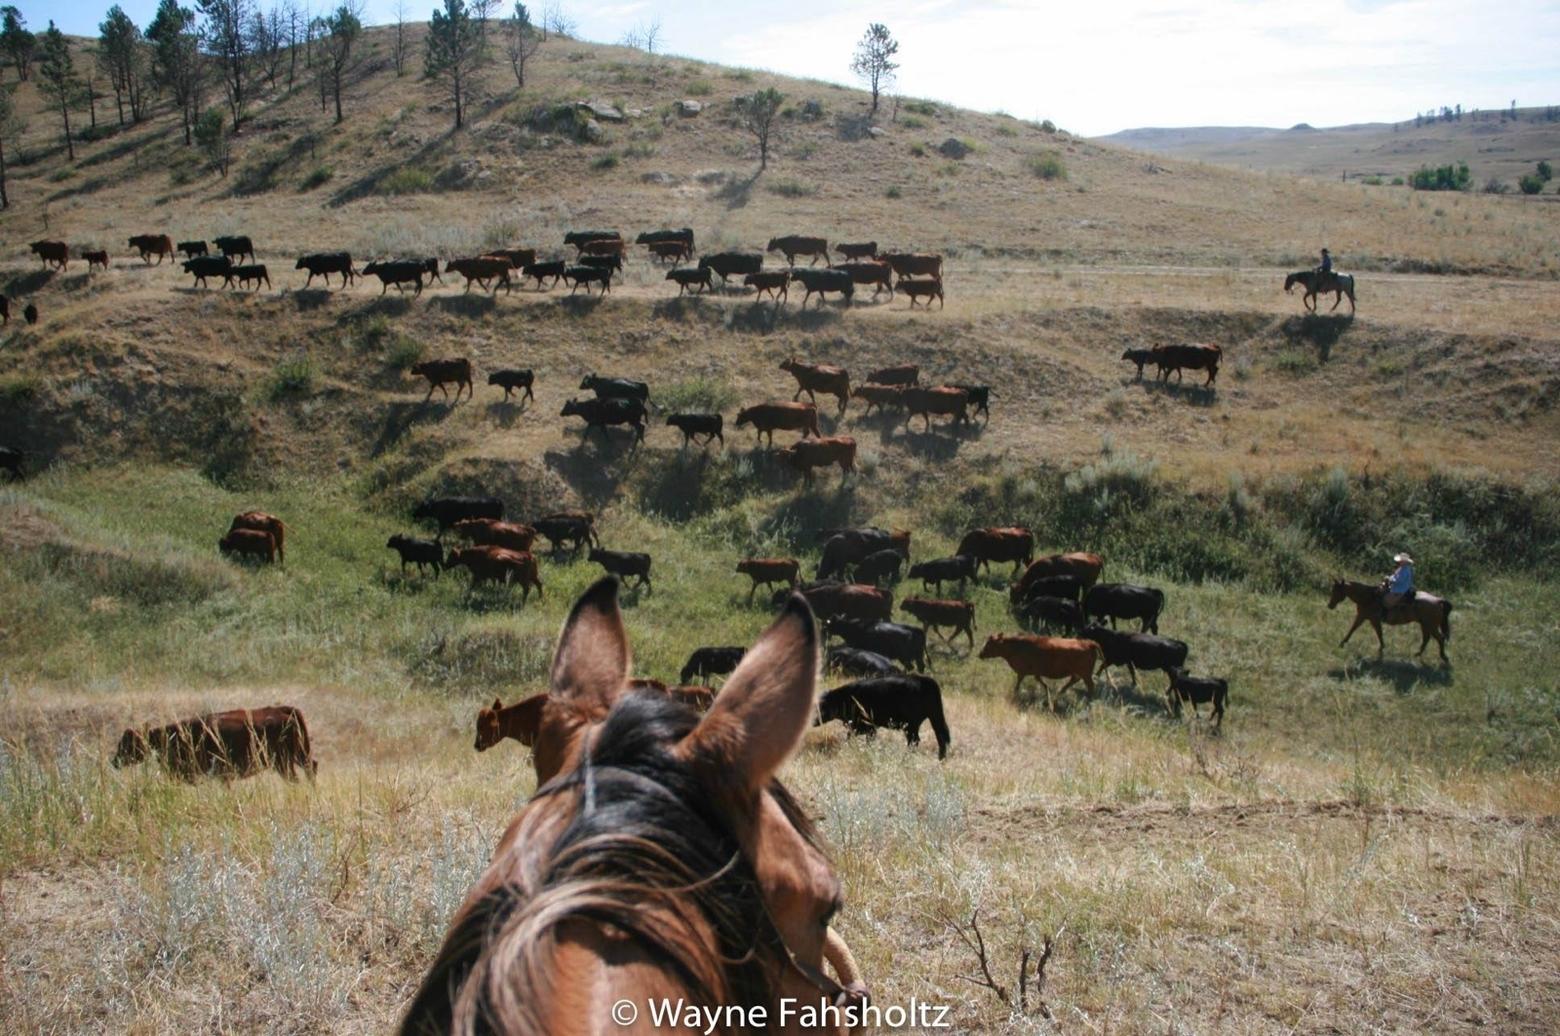 You can learn a lot about the land from the back of a horse. At the Plank Stewardship Initiative, Heyneman shares many of the lessons he's learned about caring for grass, soil and water, co-existing with wildlife, and legacy in Montana and Wyoming.  Photo courtesy Wayne Fahsholtz (http://www.agwingroup.com)